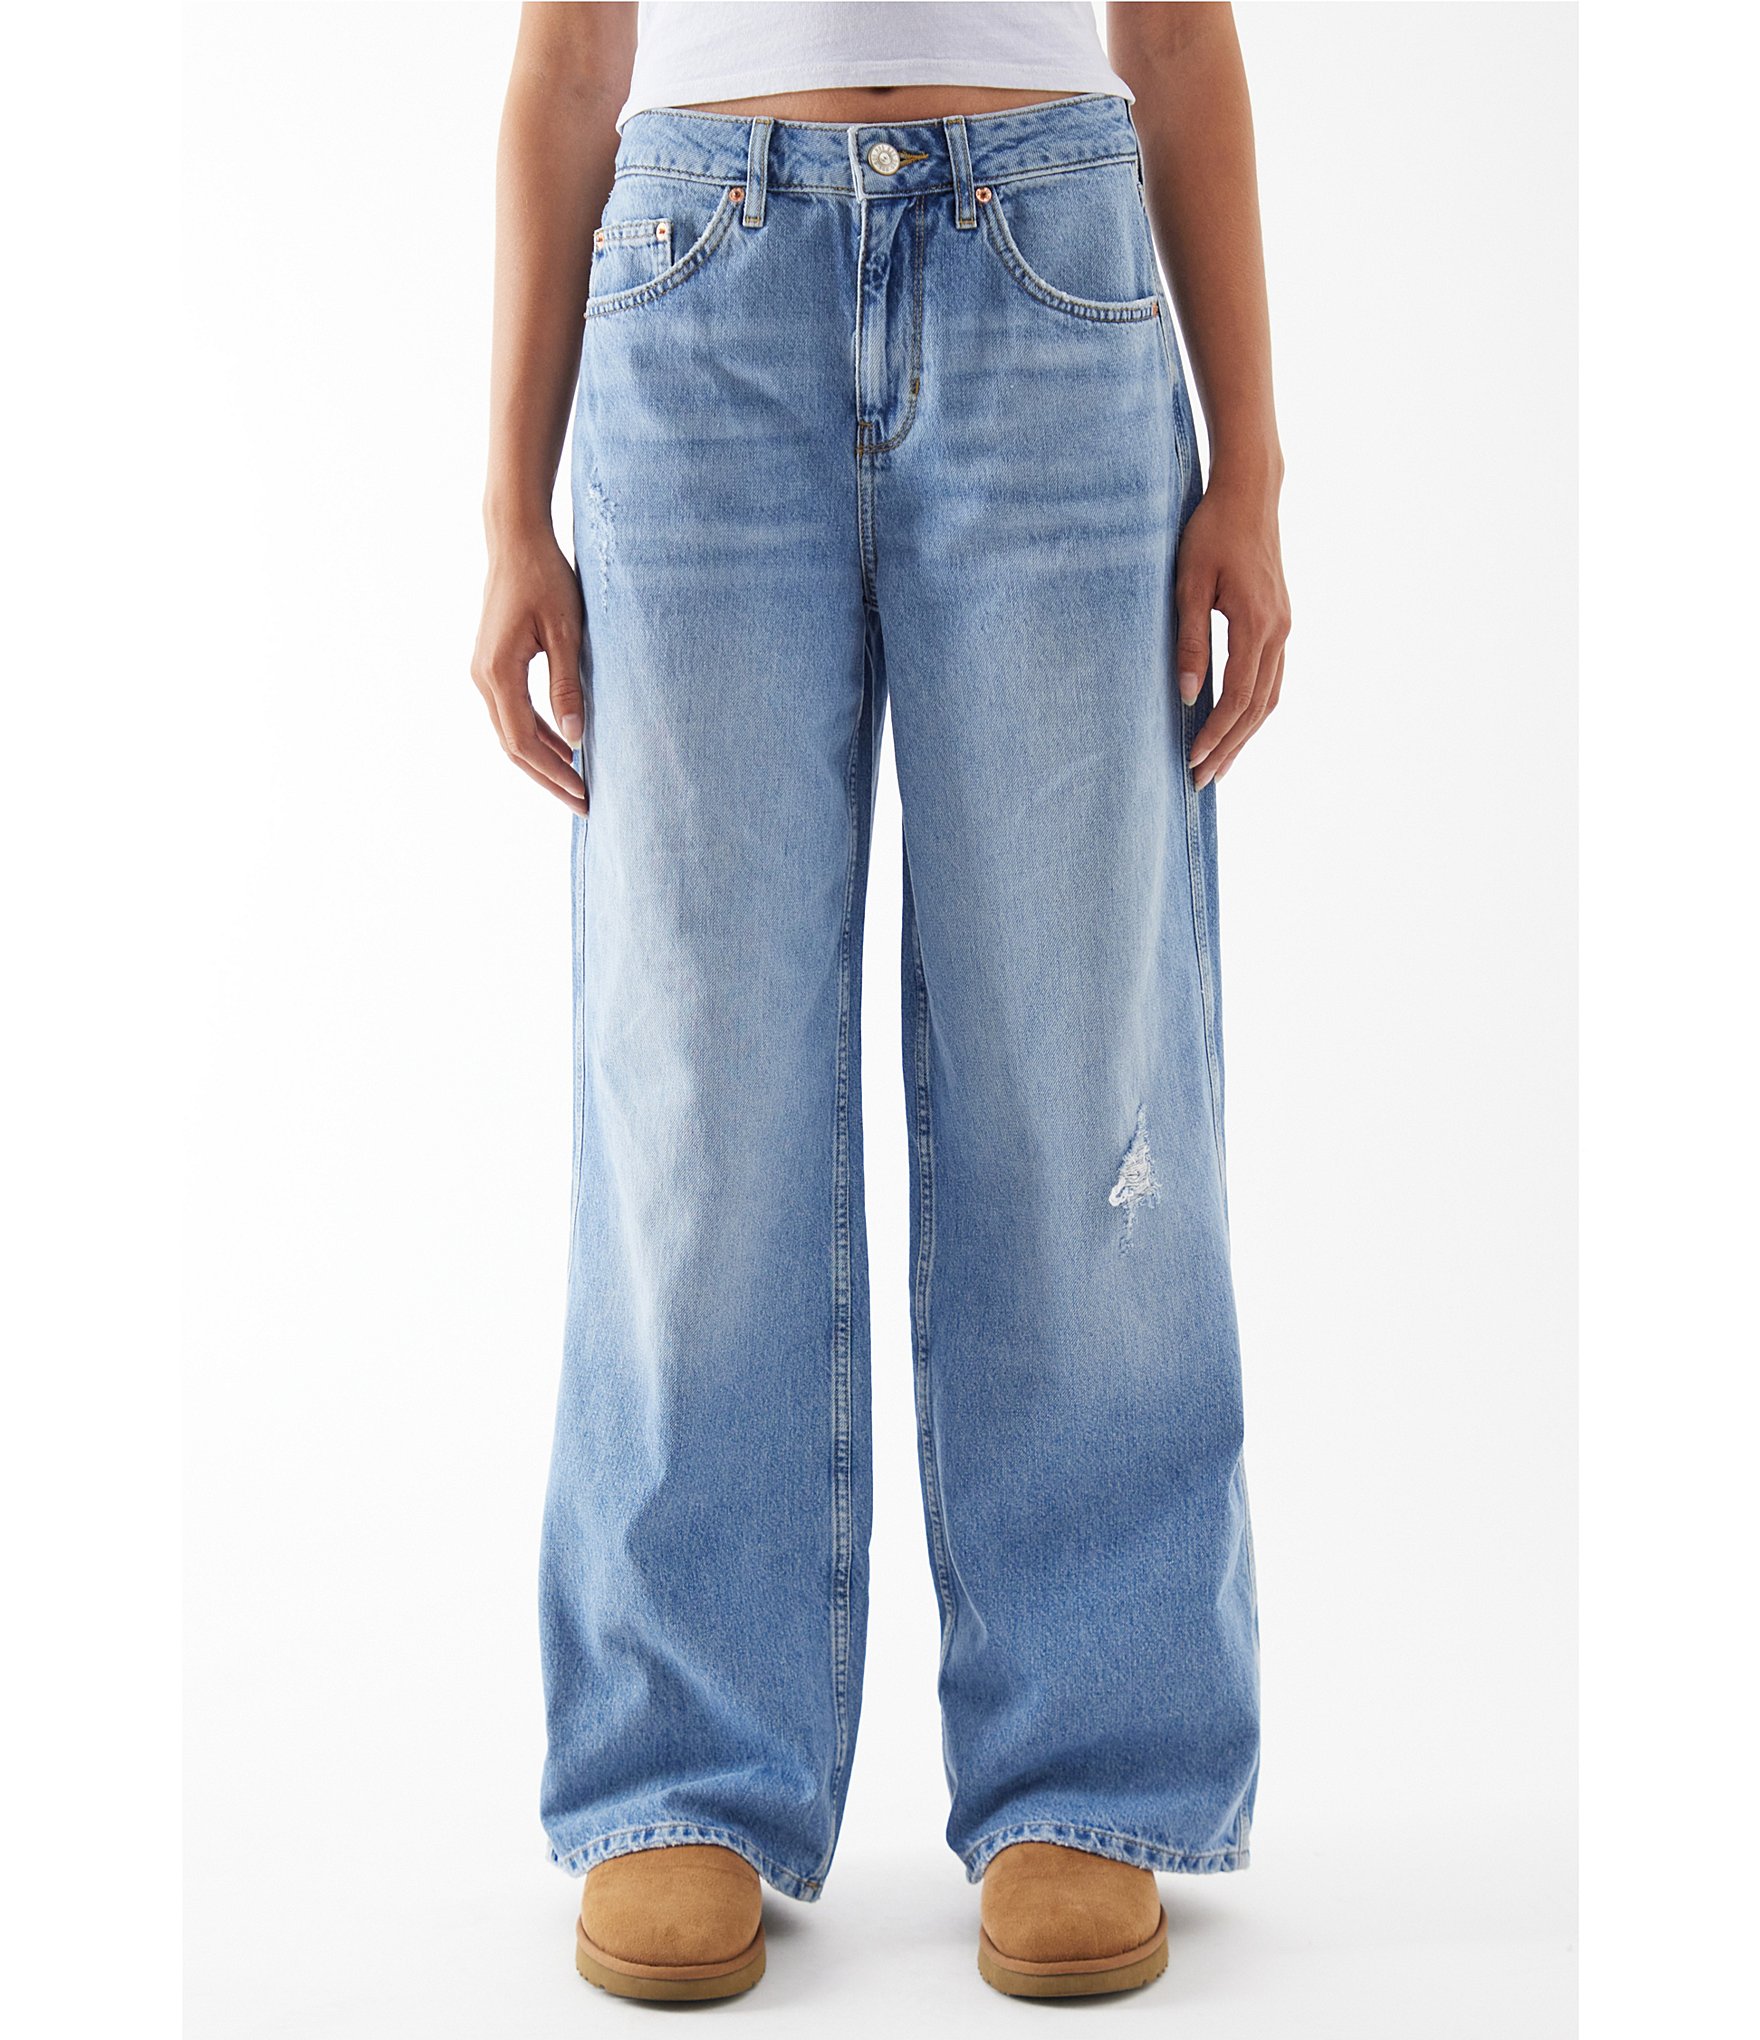 https://dimg.dillards.com/is/image/DillardsZoom/zoom/bdg-urban-outfitters-mid-rise-wide-leg-puddle-jeans/00000000_zi_5f839d4f-3e53-46b3-94c2-2b02f4e4a75b.jpg